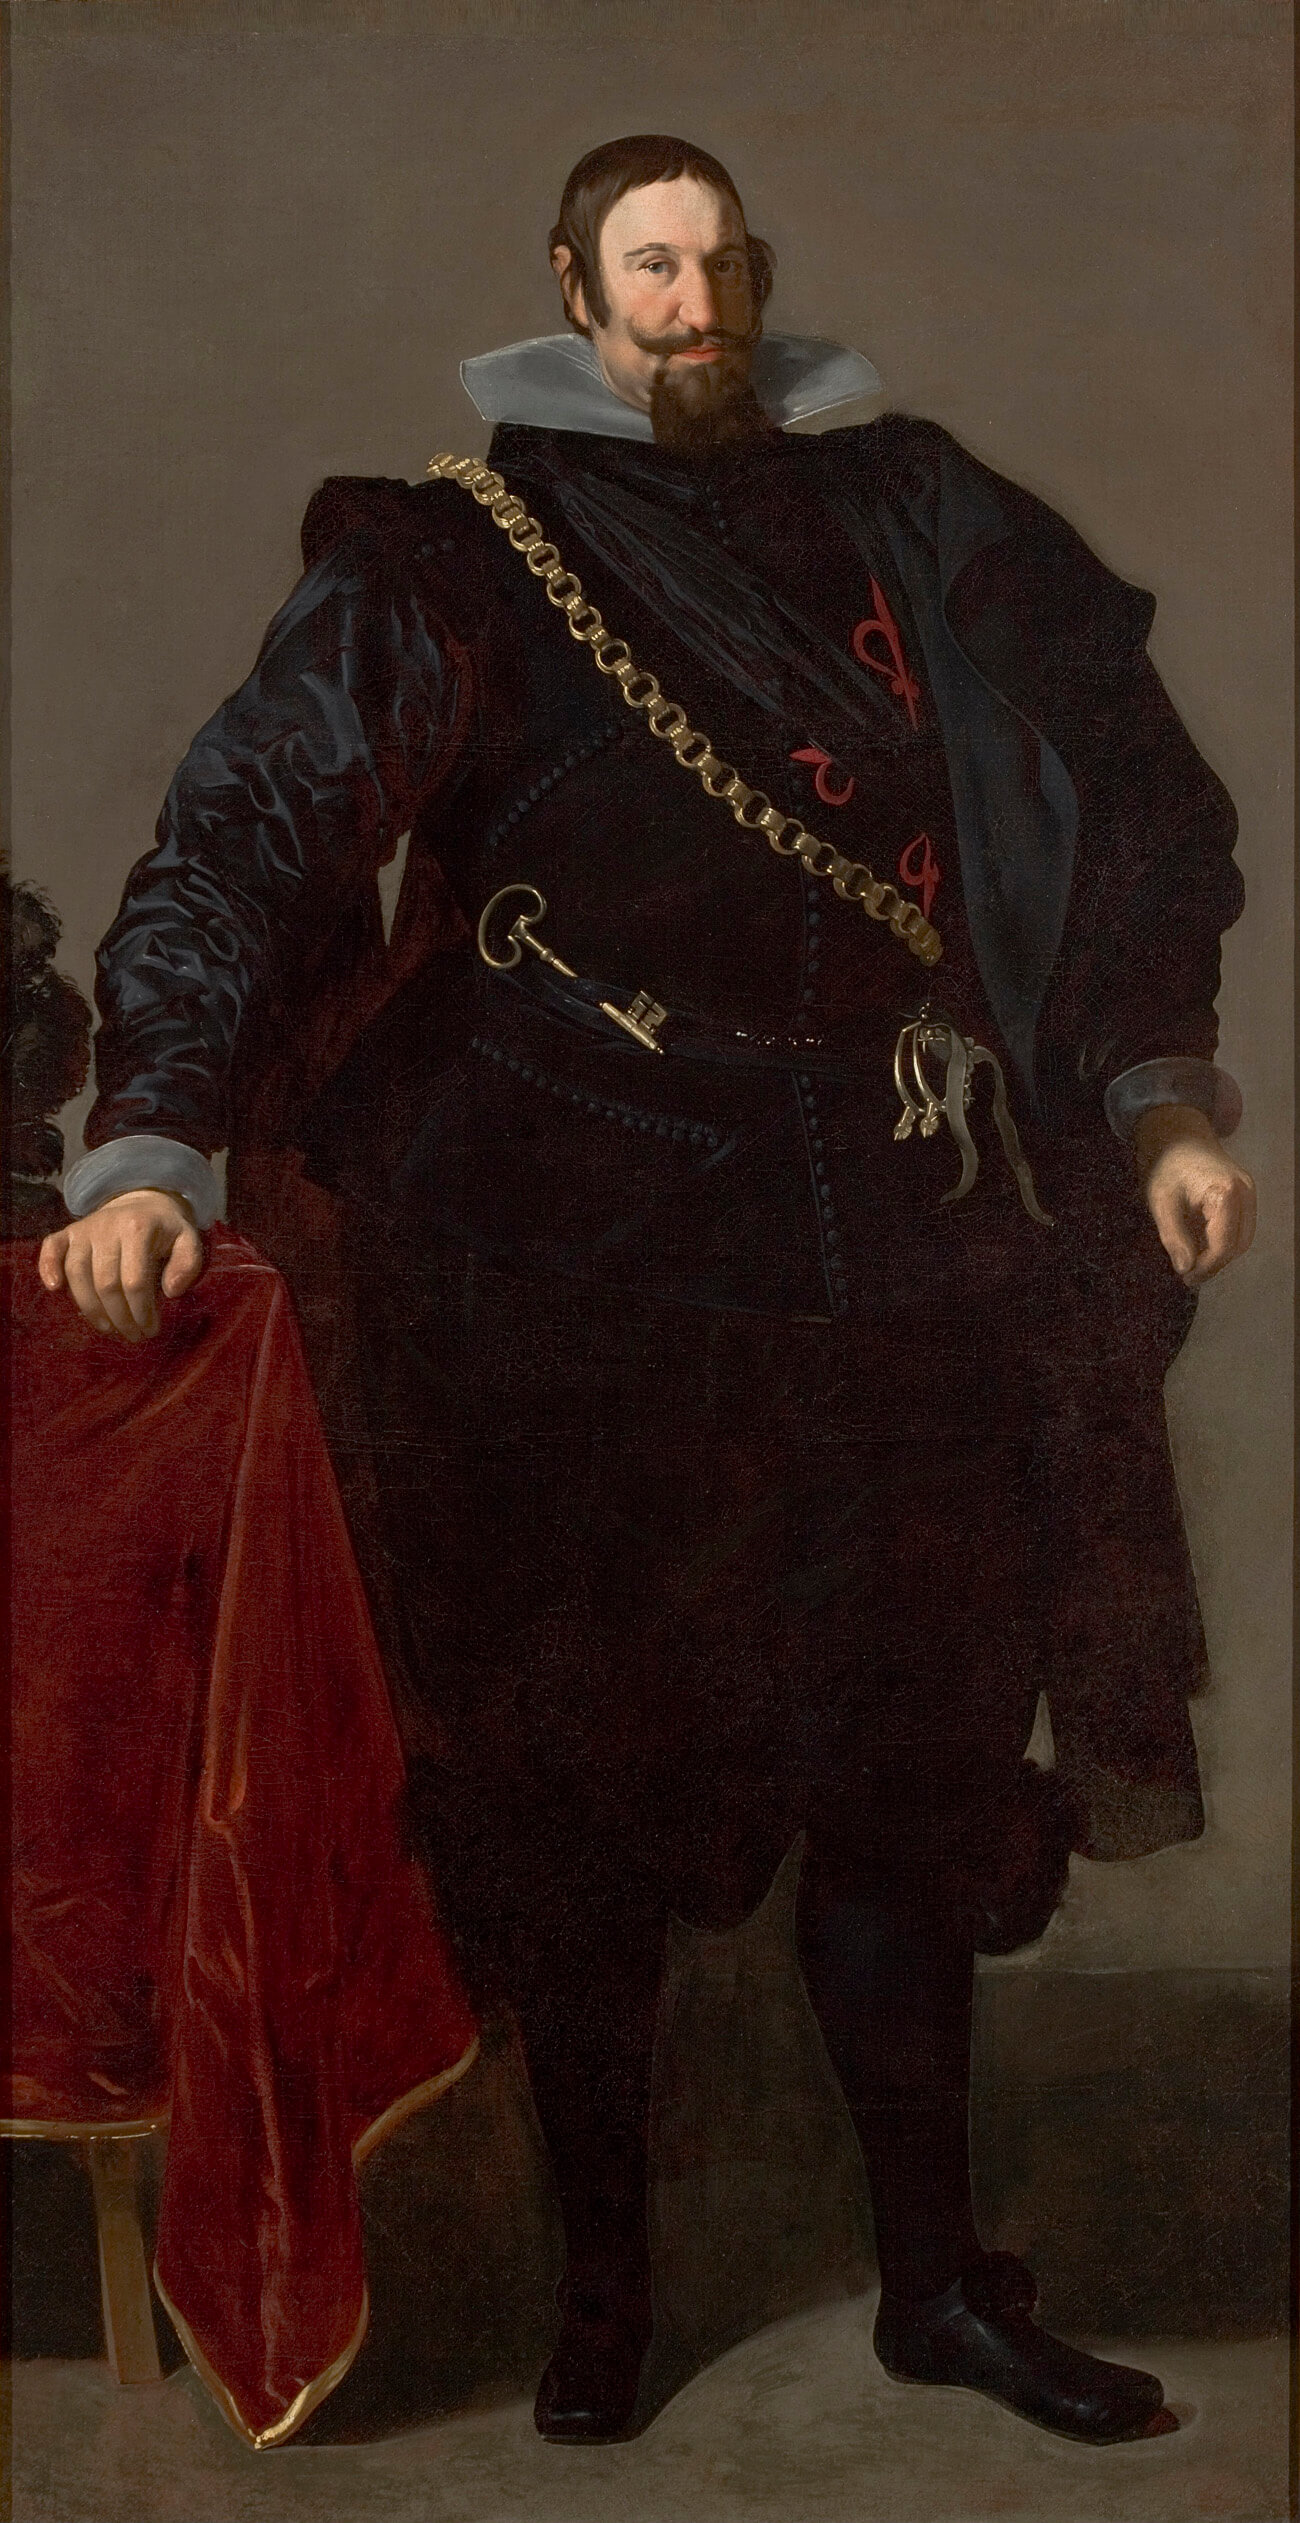 A portrait of the Count-Duke of Olivares by Diego Velázquez, 1624.